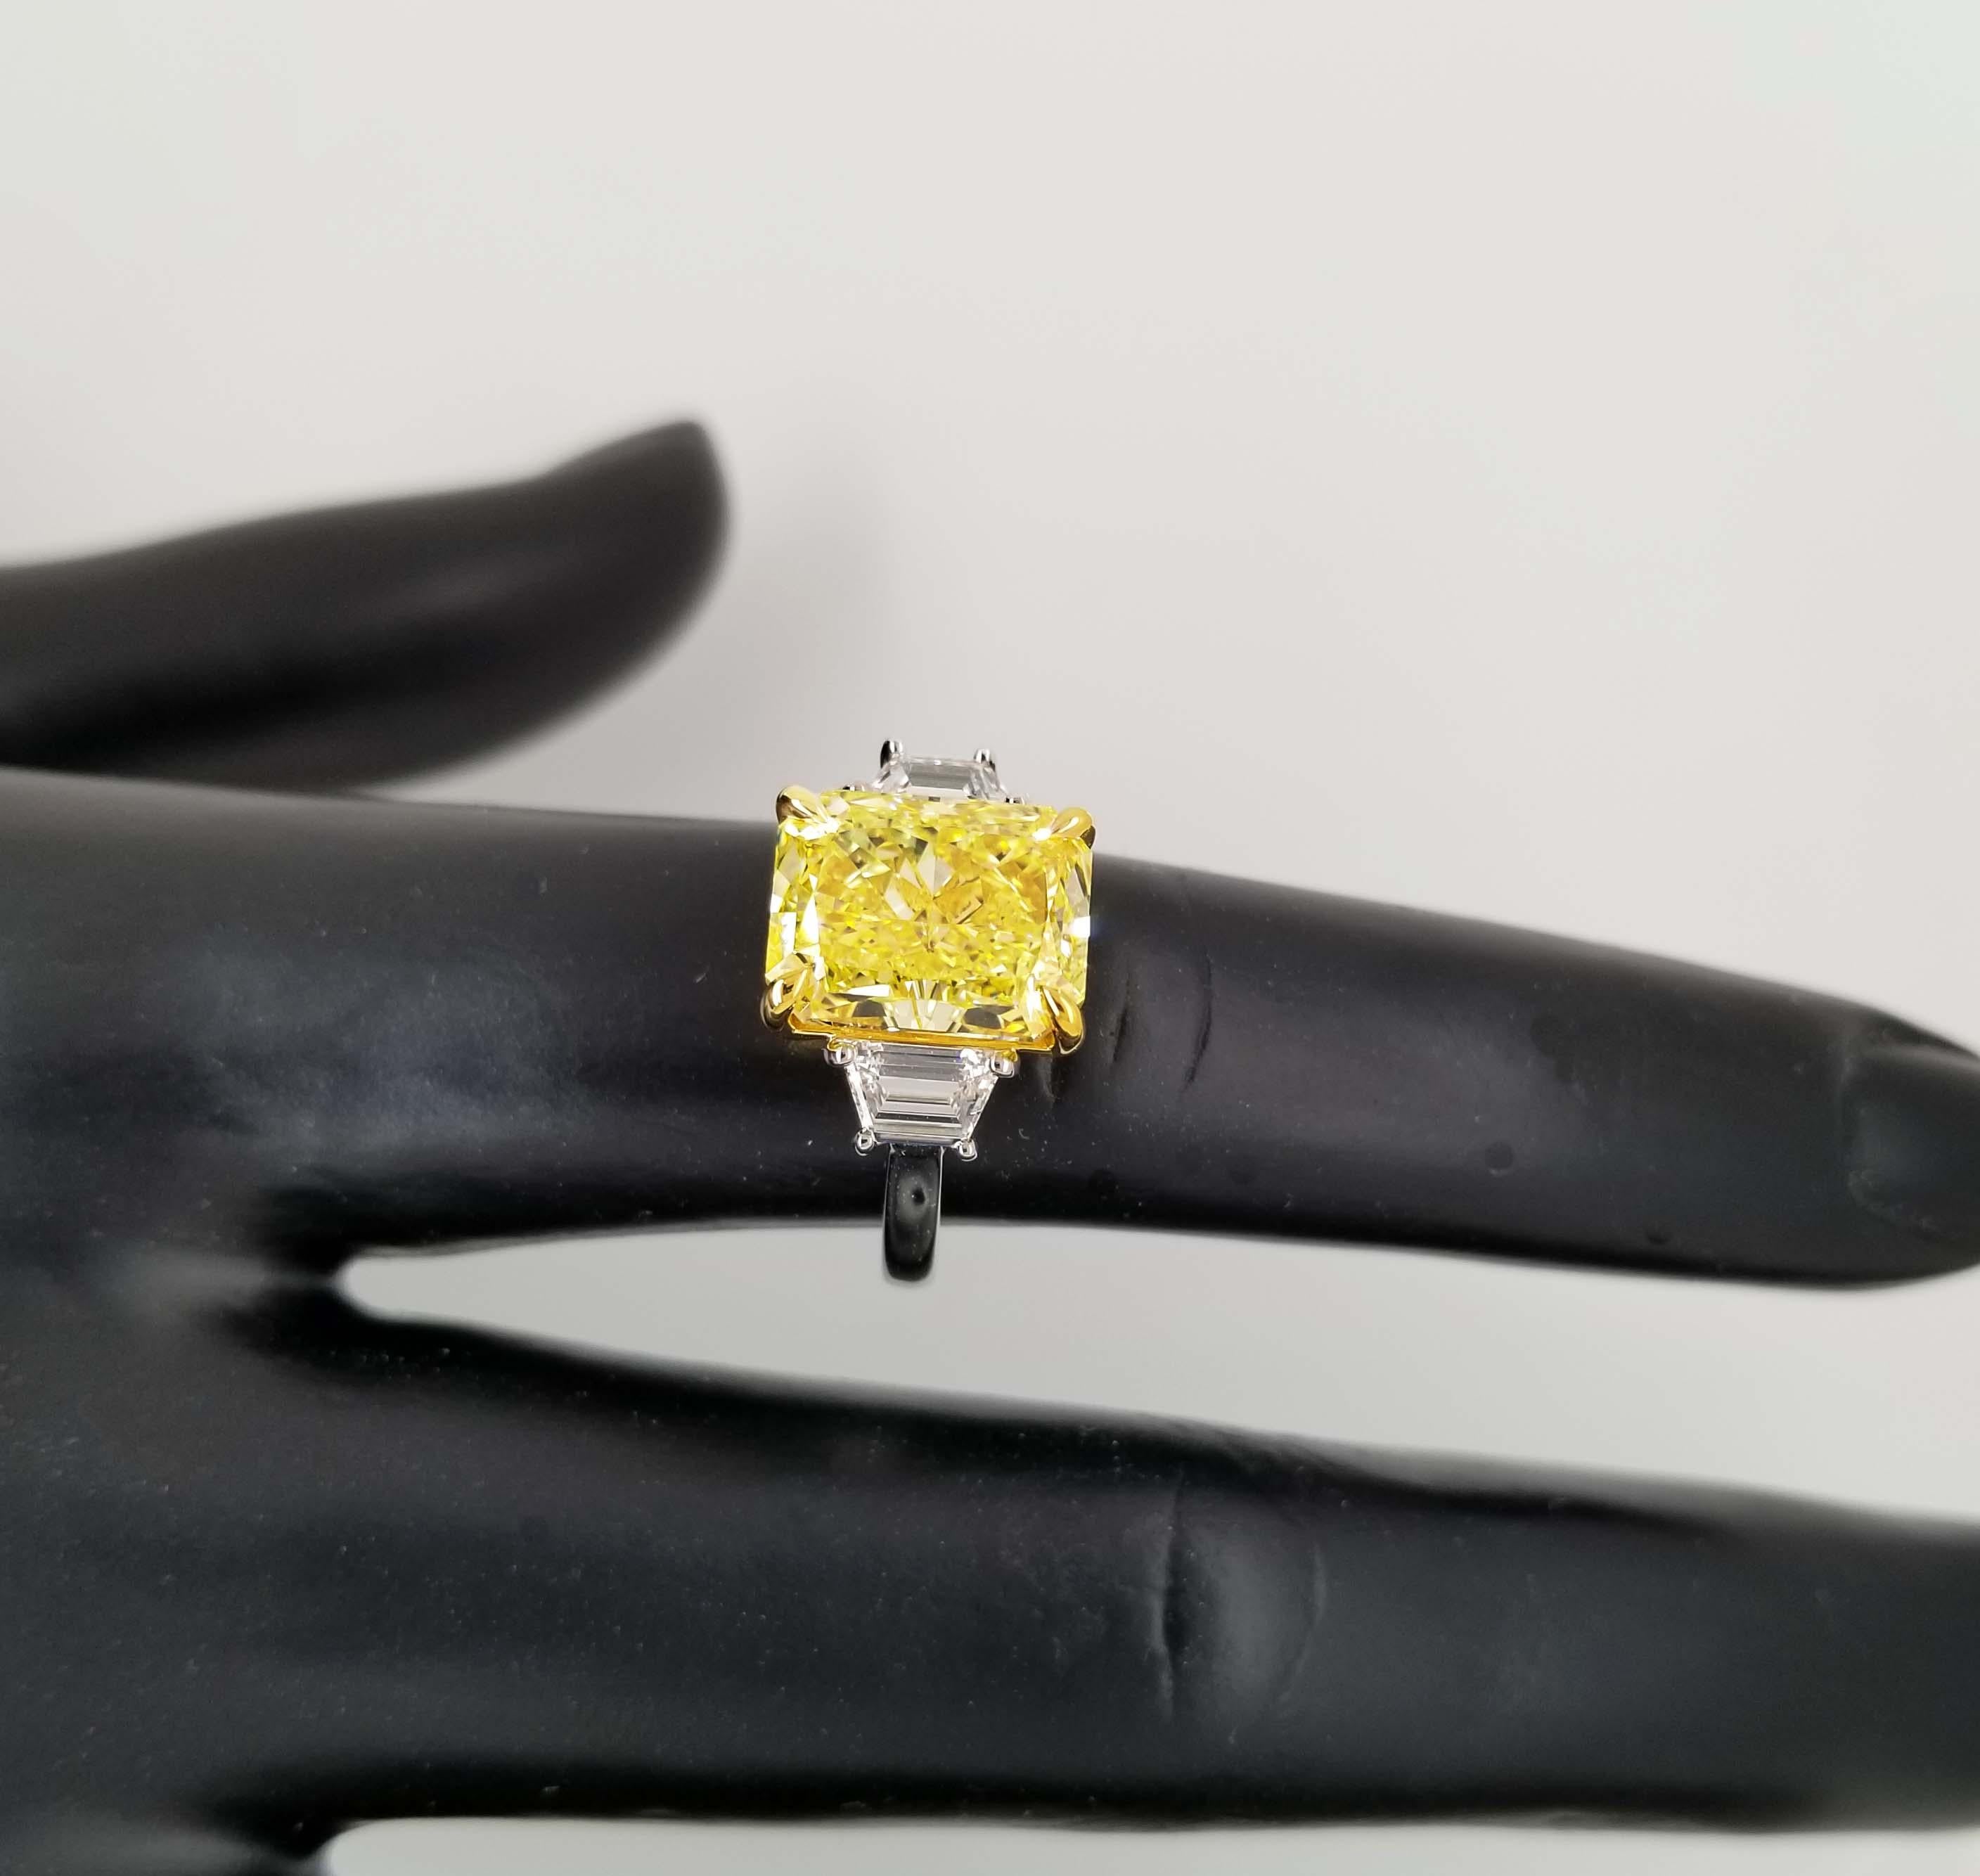 Contemporary Scarselli 5 Carat Fancy Intense Yellow Diamond Engagement Ring in Platinum